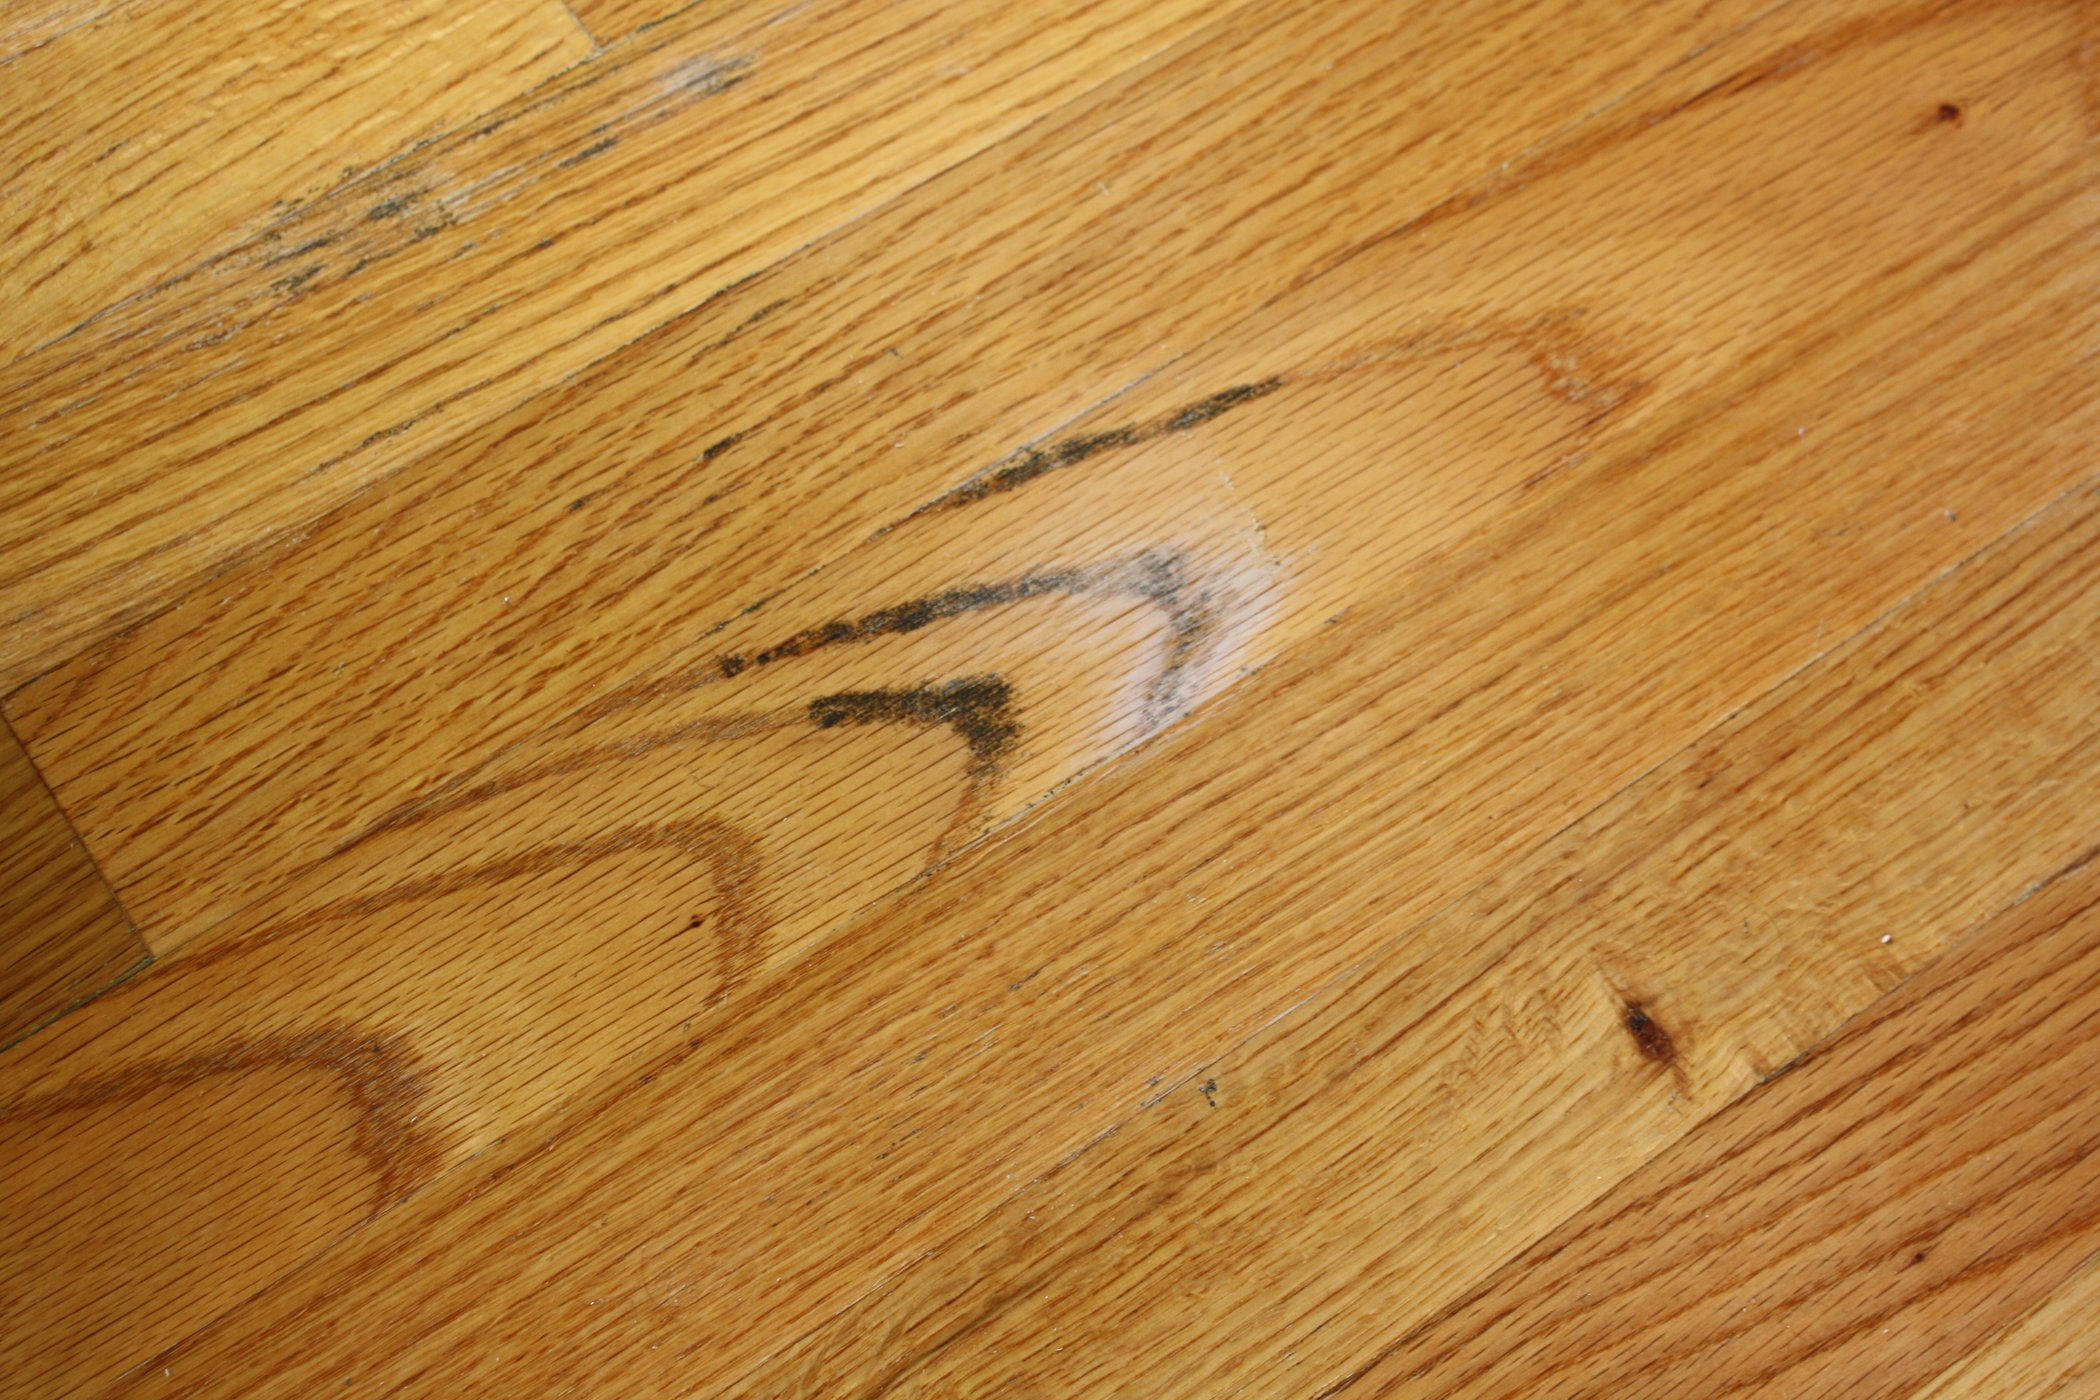 hardwood floor repair service of how to clean mold from a wood floor 4 steps inside fylcmqyg7dyp6ds